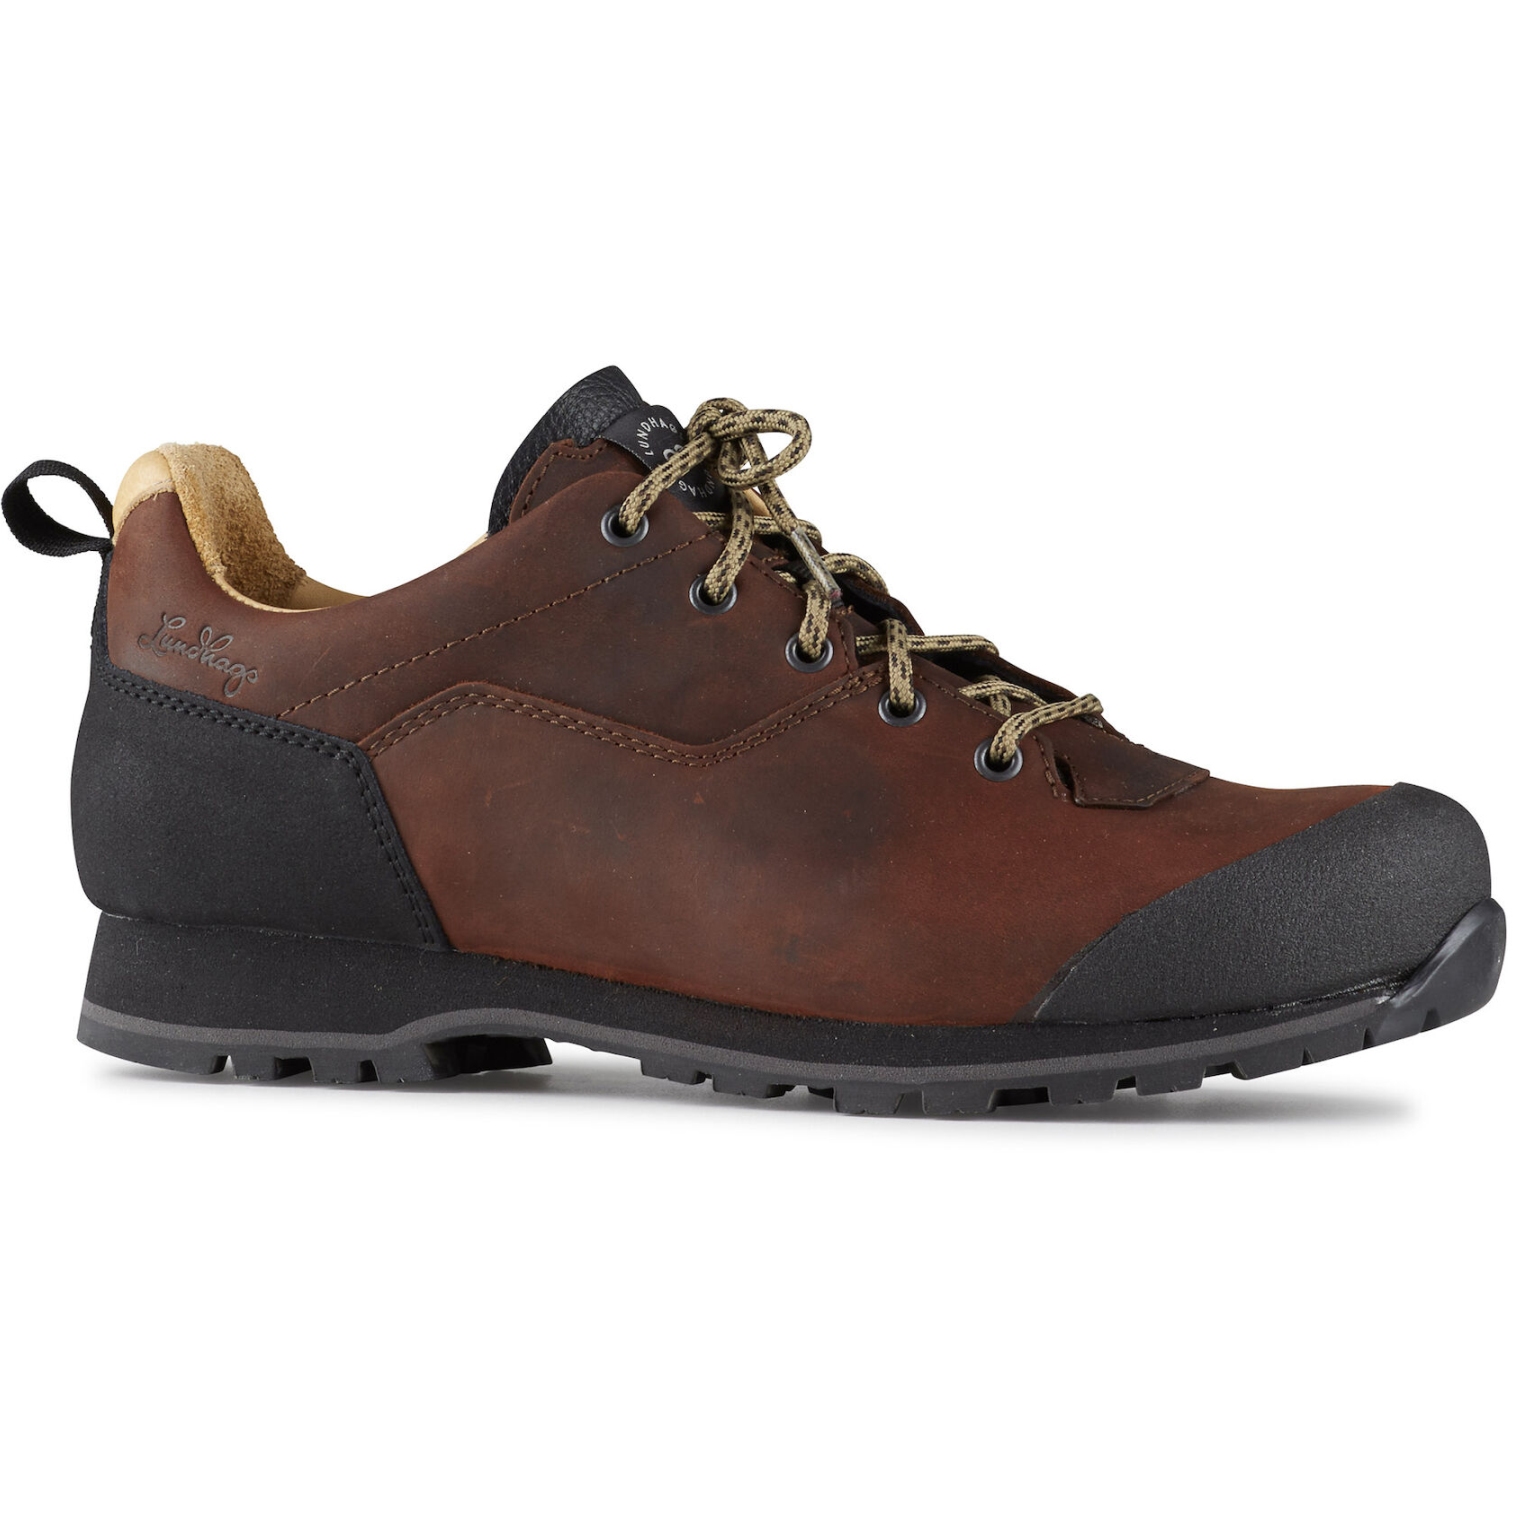 Picture of Lundhags Stuore Low Hiking Shoes - Chestnut 711